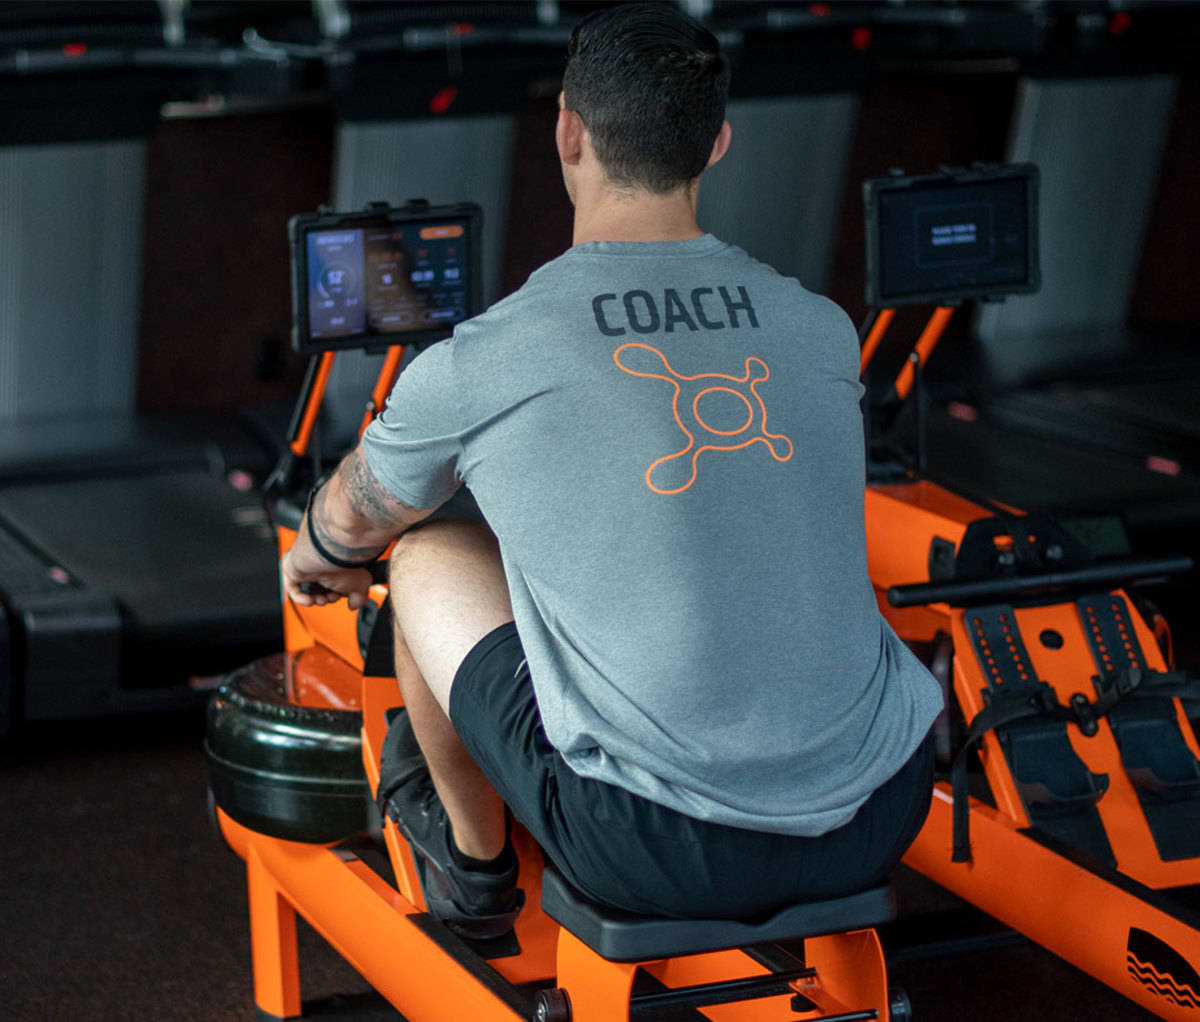 Orange Theory Fitness heart rate monitors (Core and Burn types)